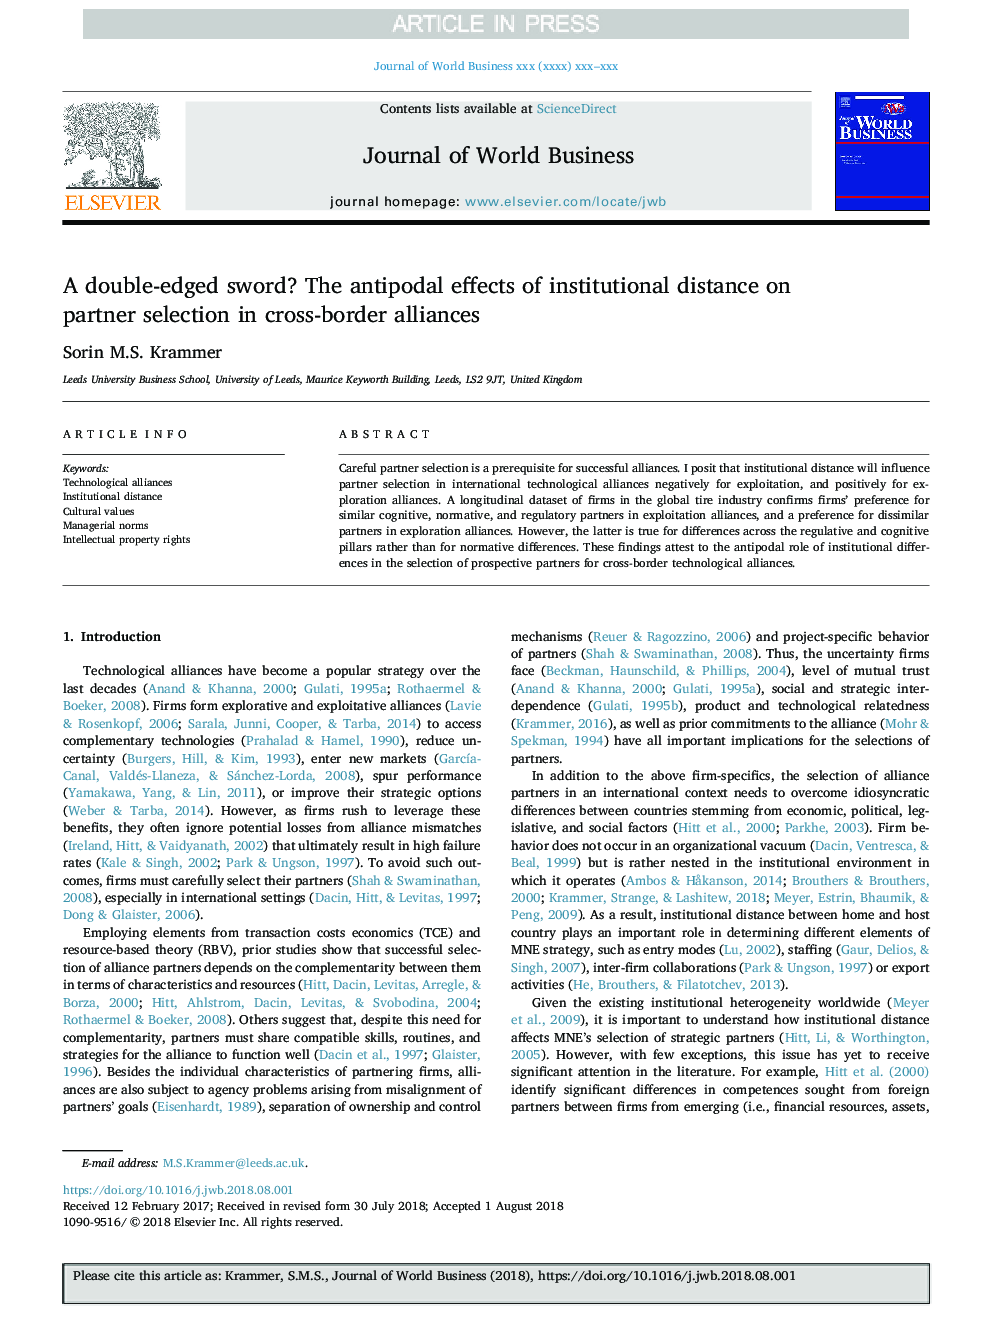 A double-edged sword? The antipodal effects of institutional distance on partner selection in cross-border alliances